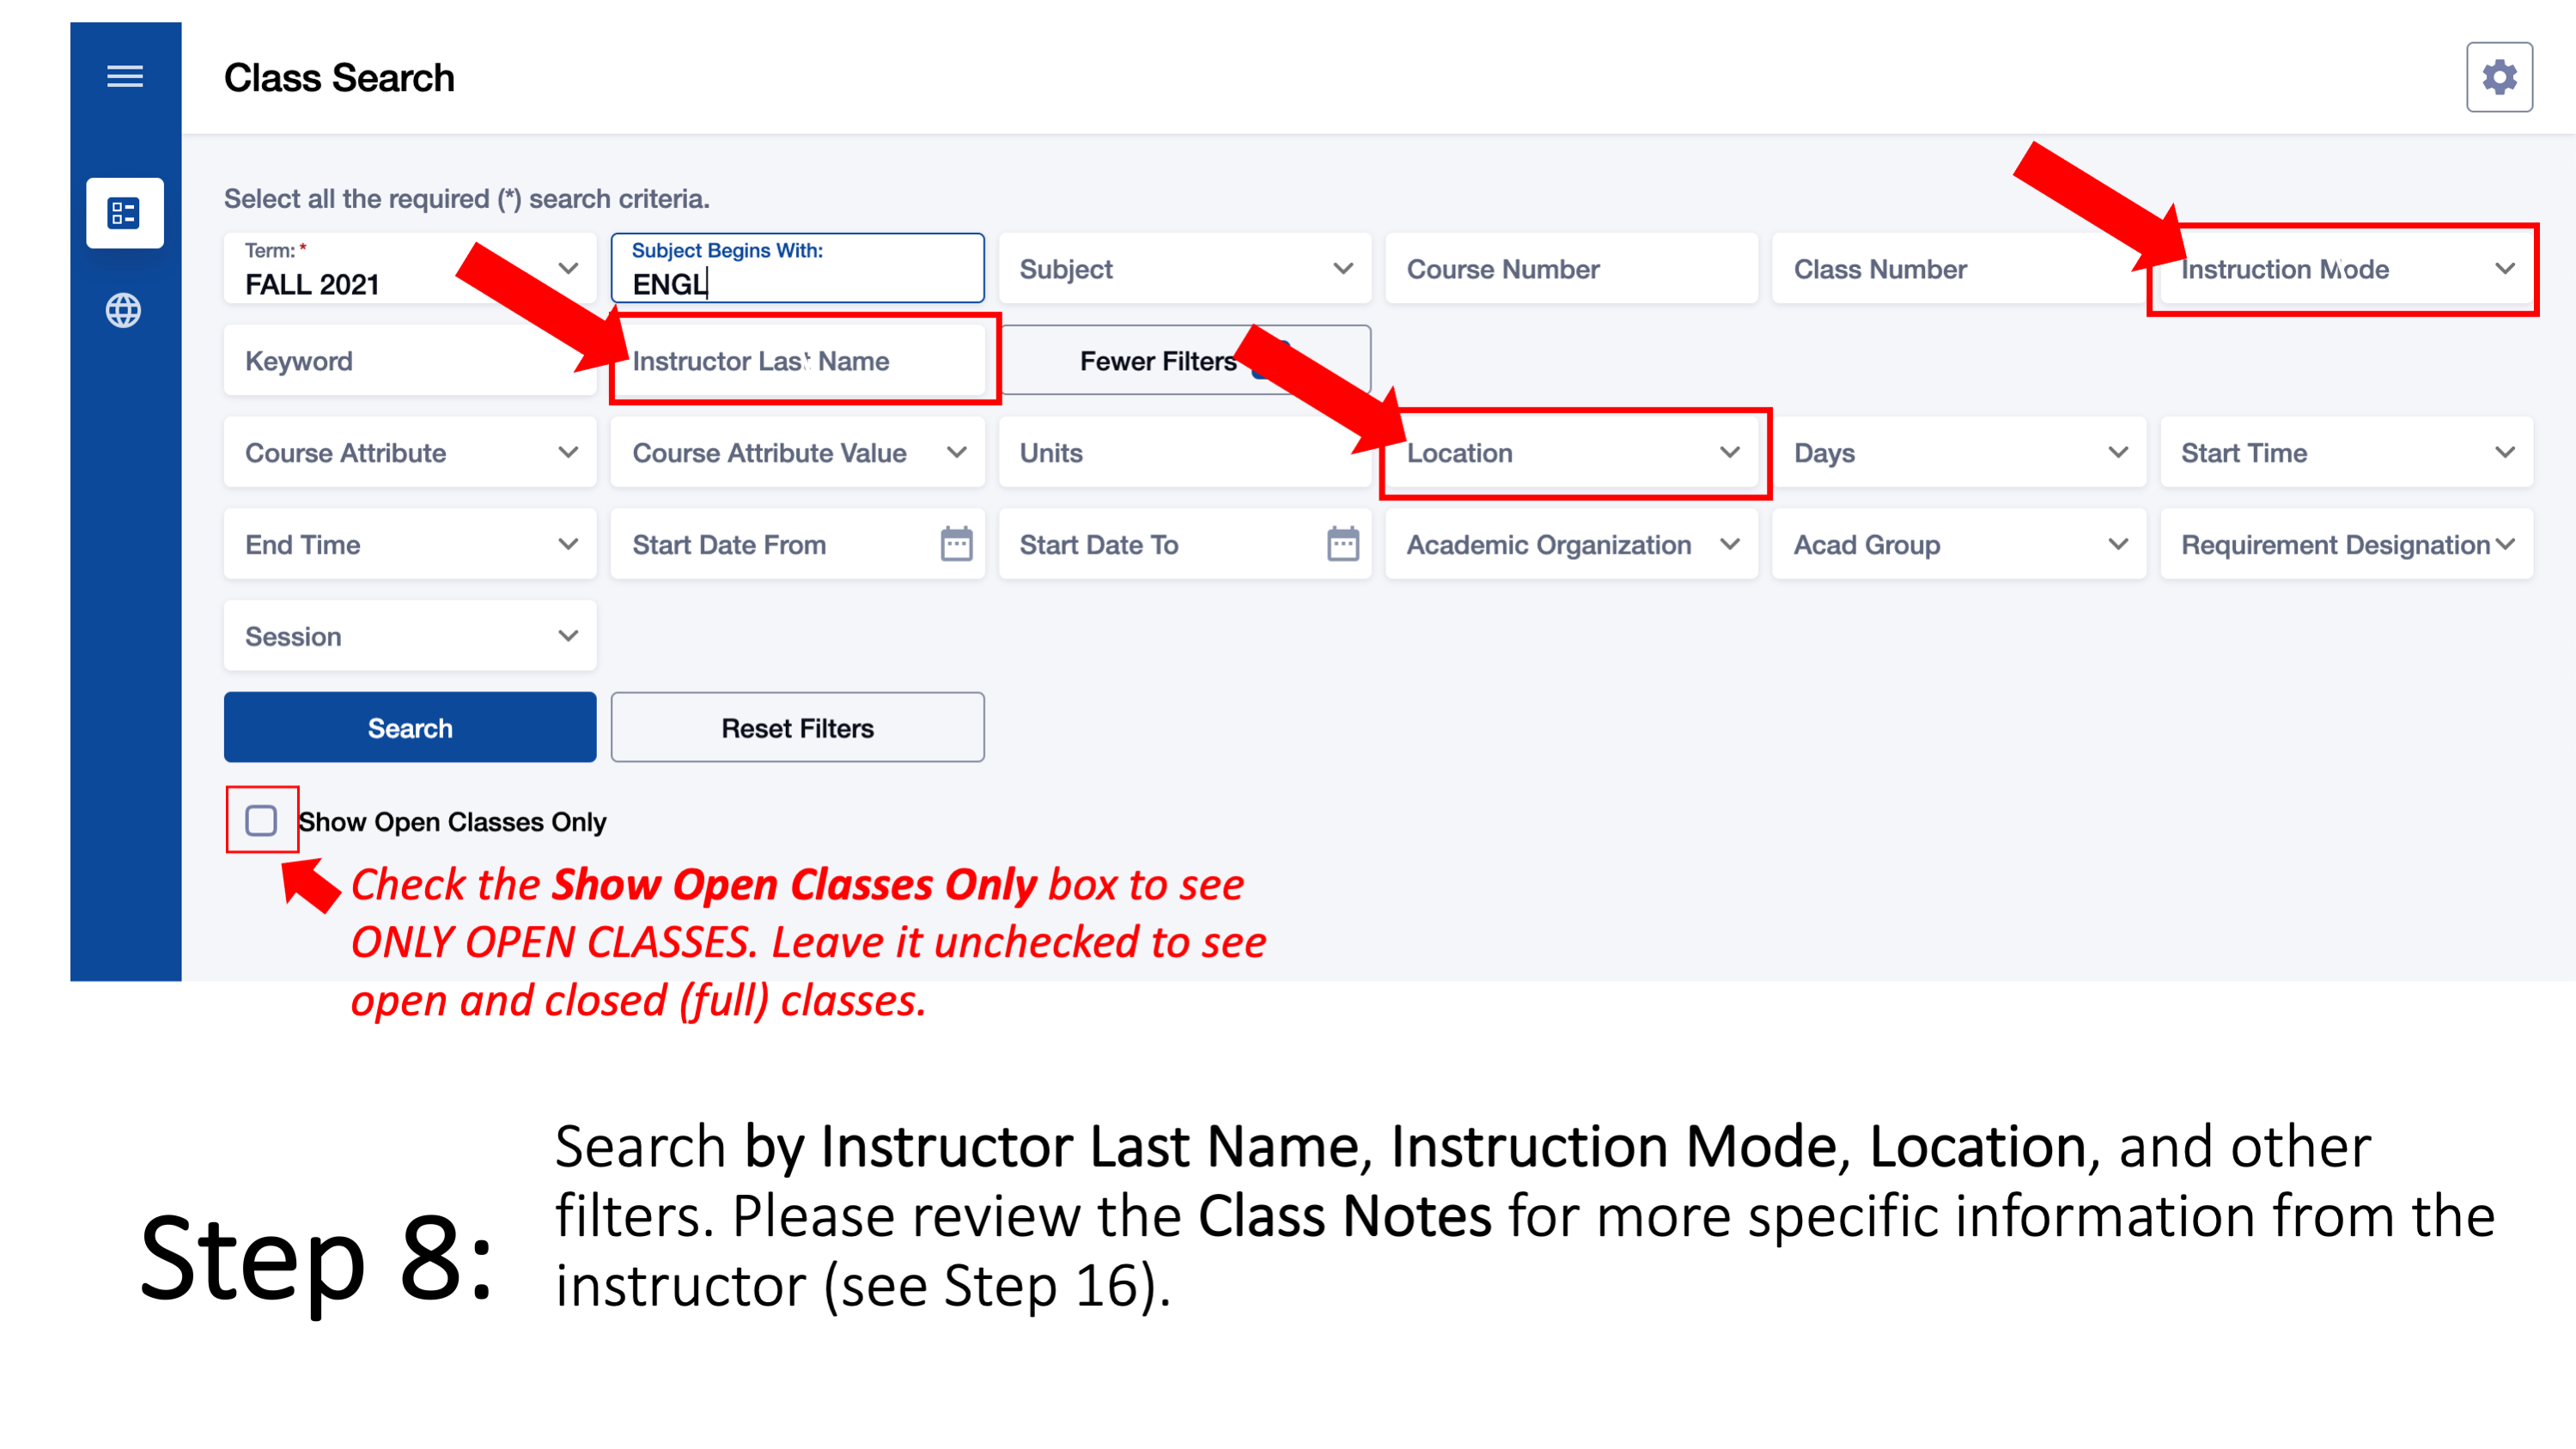 Step 8: Search by Instructor Last Name, Instruction Mode, Location, and other filters. Please review the Class Notes for more specific information from the instructor (see Step 16). Check the Show Open Classes Only box to see ONLY OPEN CLASSES. Leave it unchecked to see open and closed (full) classes